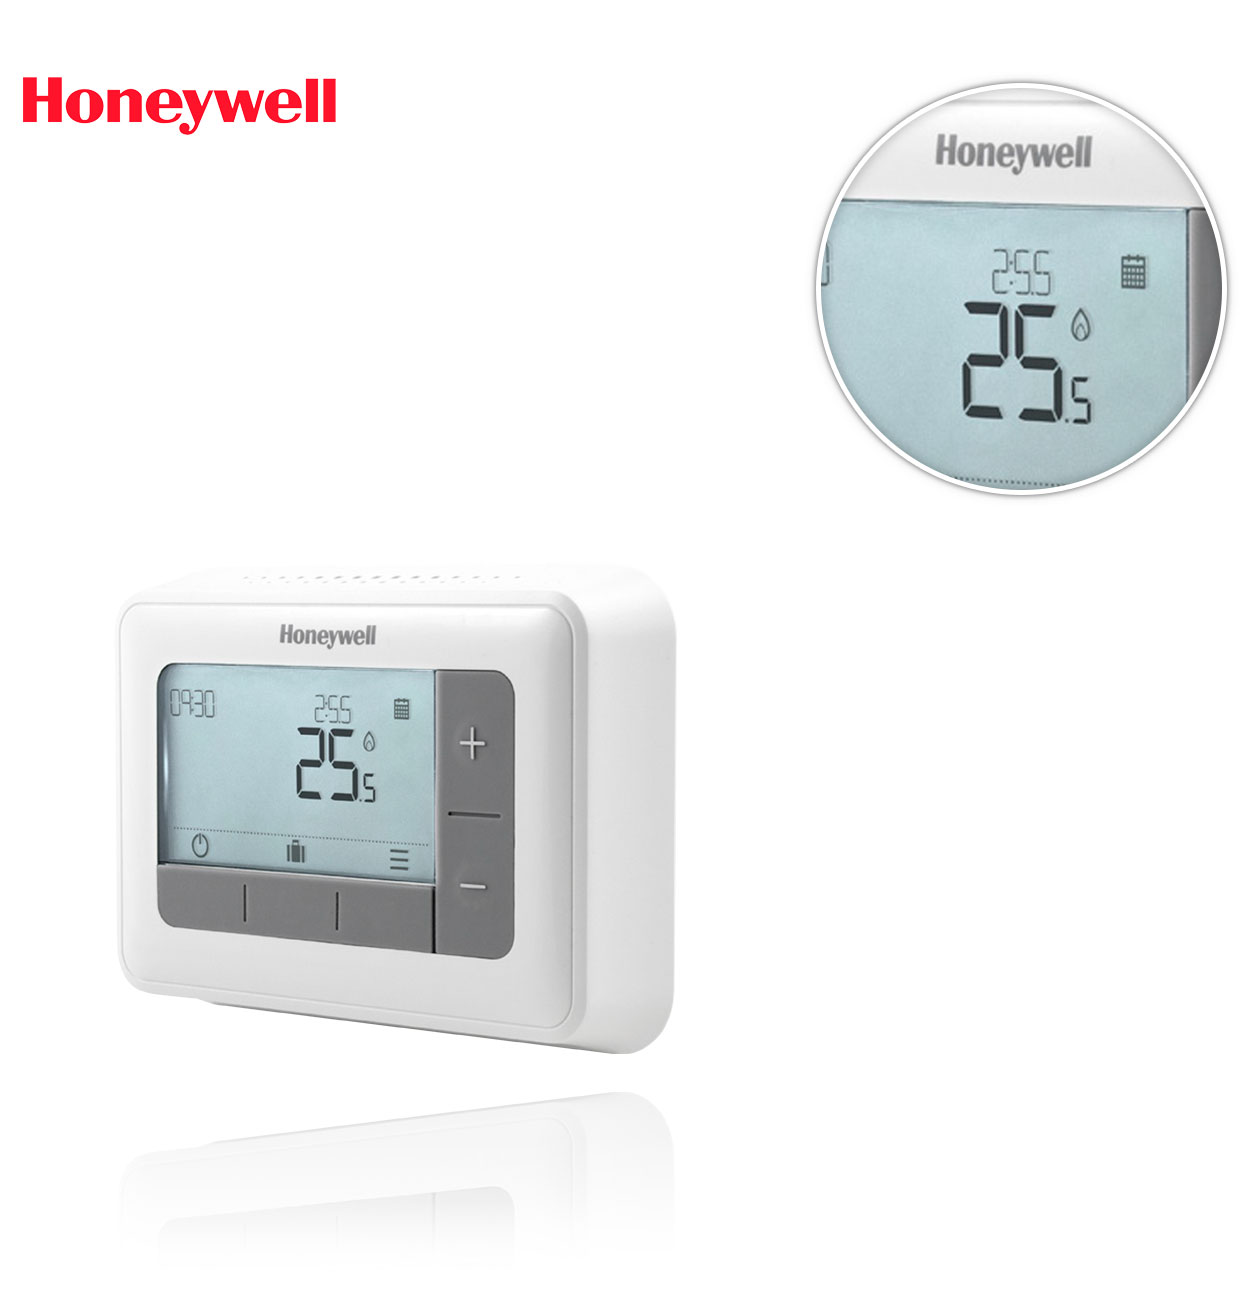 T4 HONEYWELL WIRED THERMOSTAT